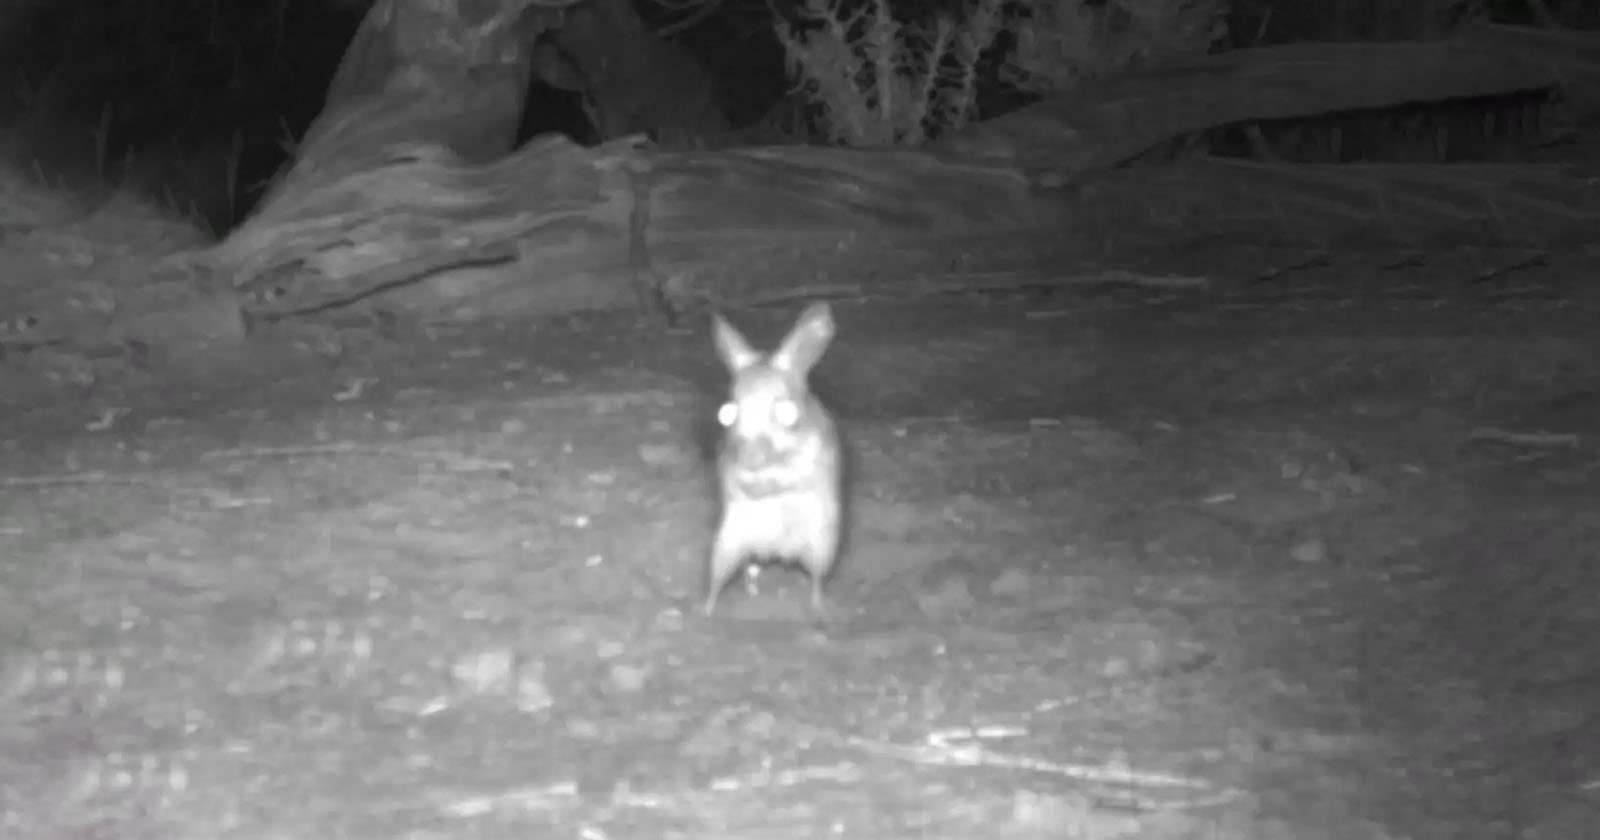 Trail Cameras Capture Bizarre Mouse Believed to be Locally Extinct